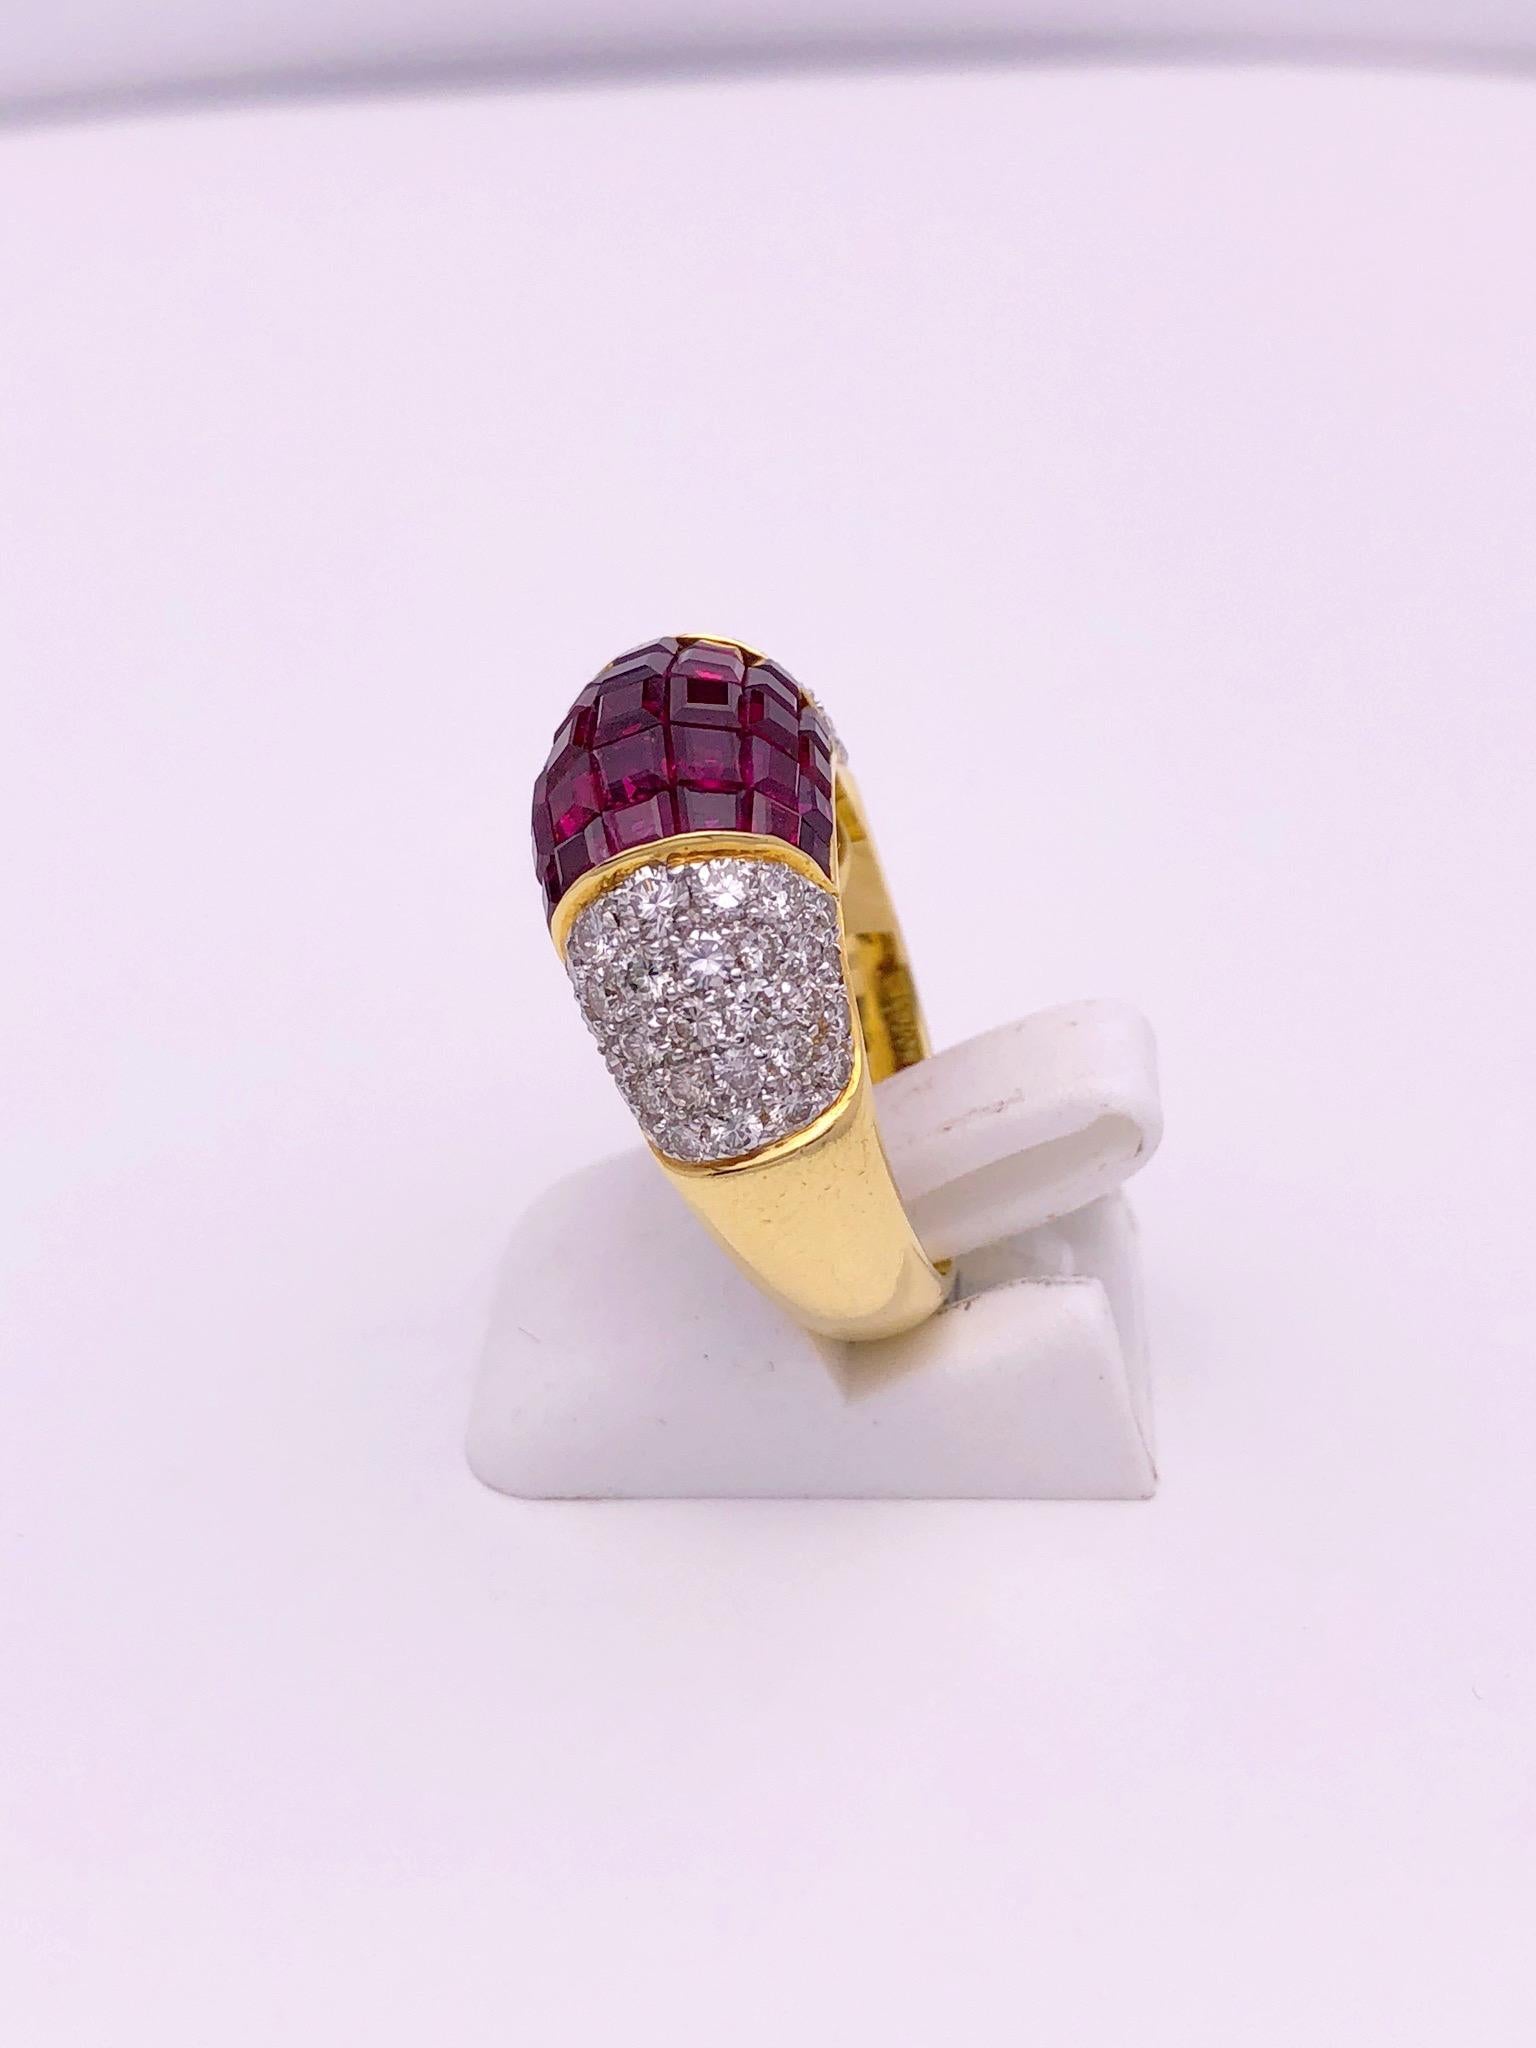 Created by the famed jewelers Sabbadini of Italy, this 18kt yellow gold ring is in their classic style. Vibrant invisibly set square cut Rubies are the center piece of this domed ring, along with pave Diamonds on either side.
Total ruby weight 4.90